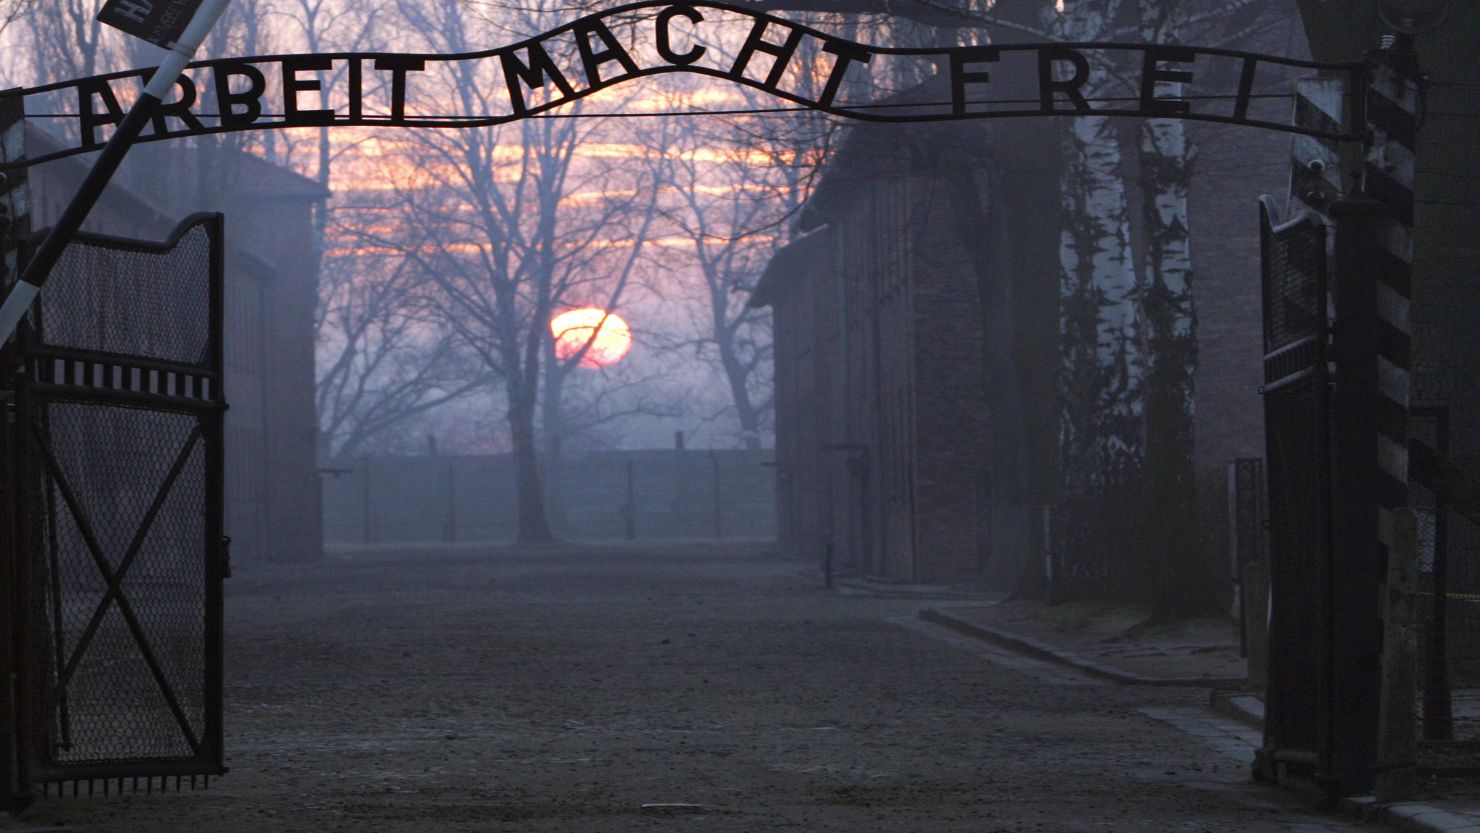 The gates of the Auschwitz prison camp run by the Nazis during World War II